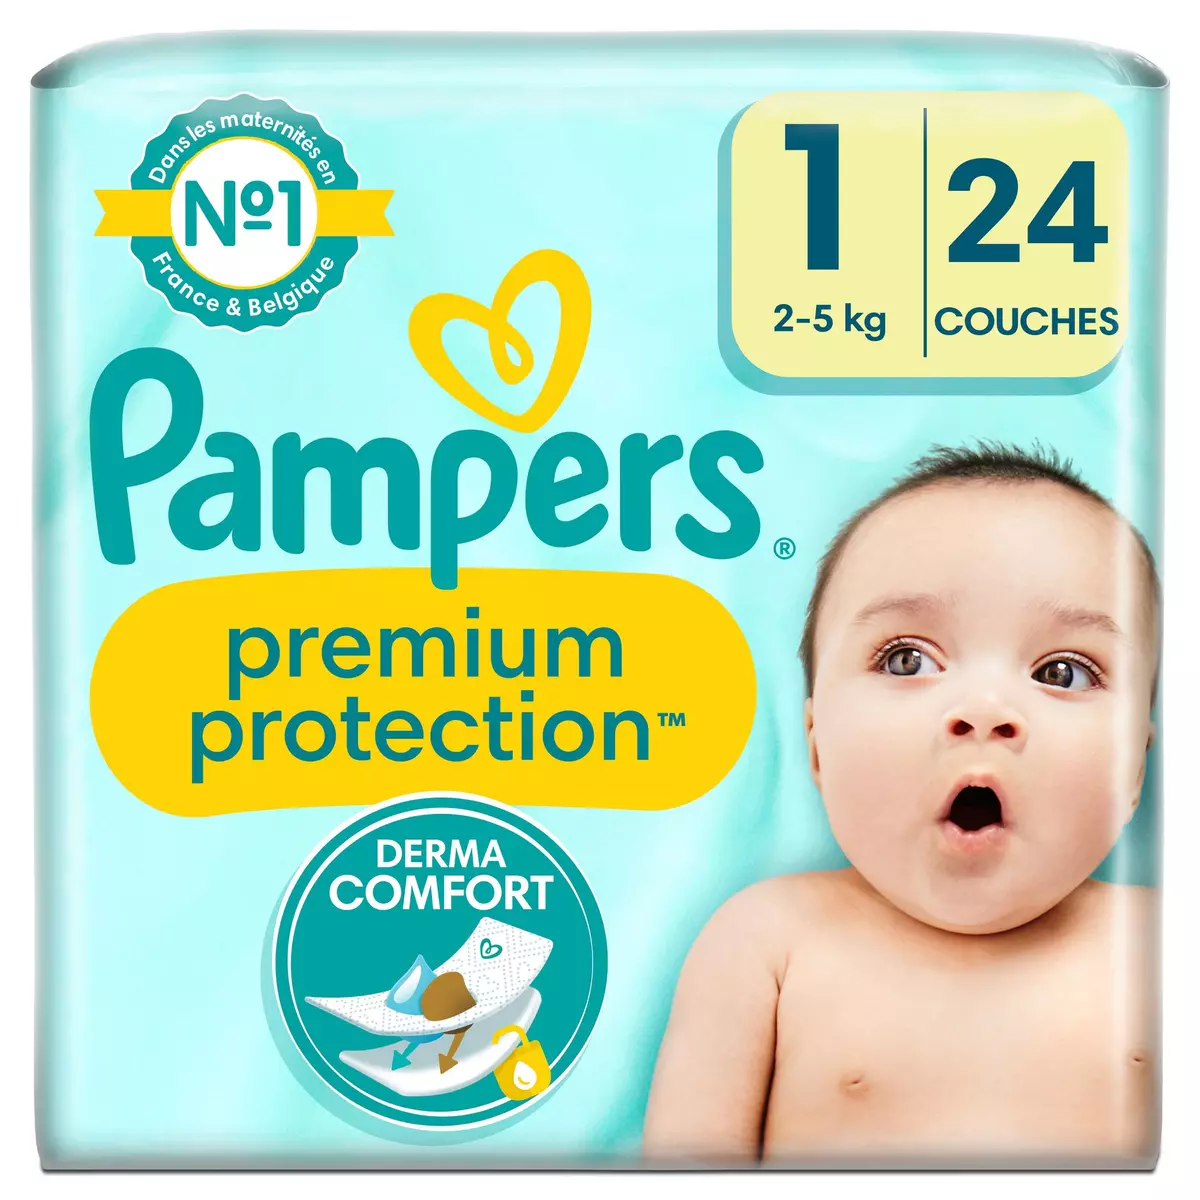 leclerc pampers 4